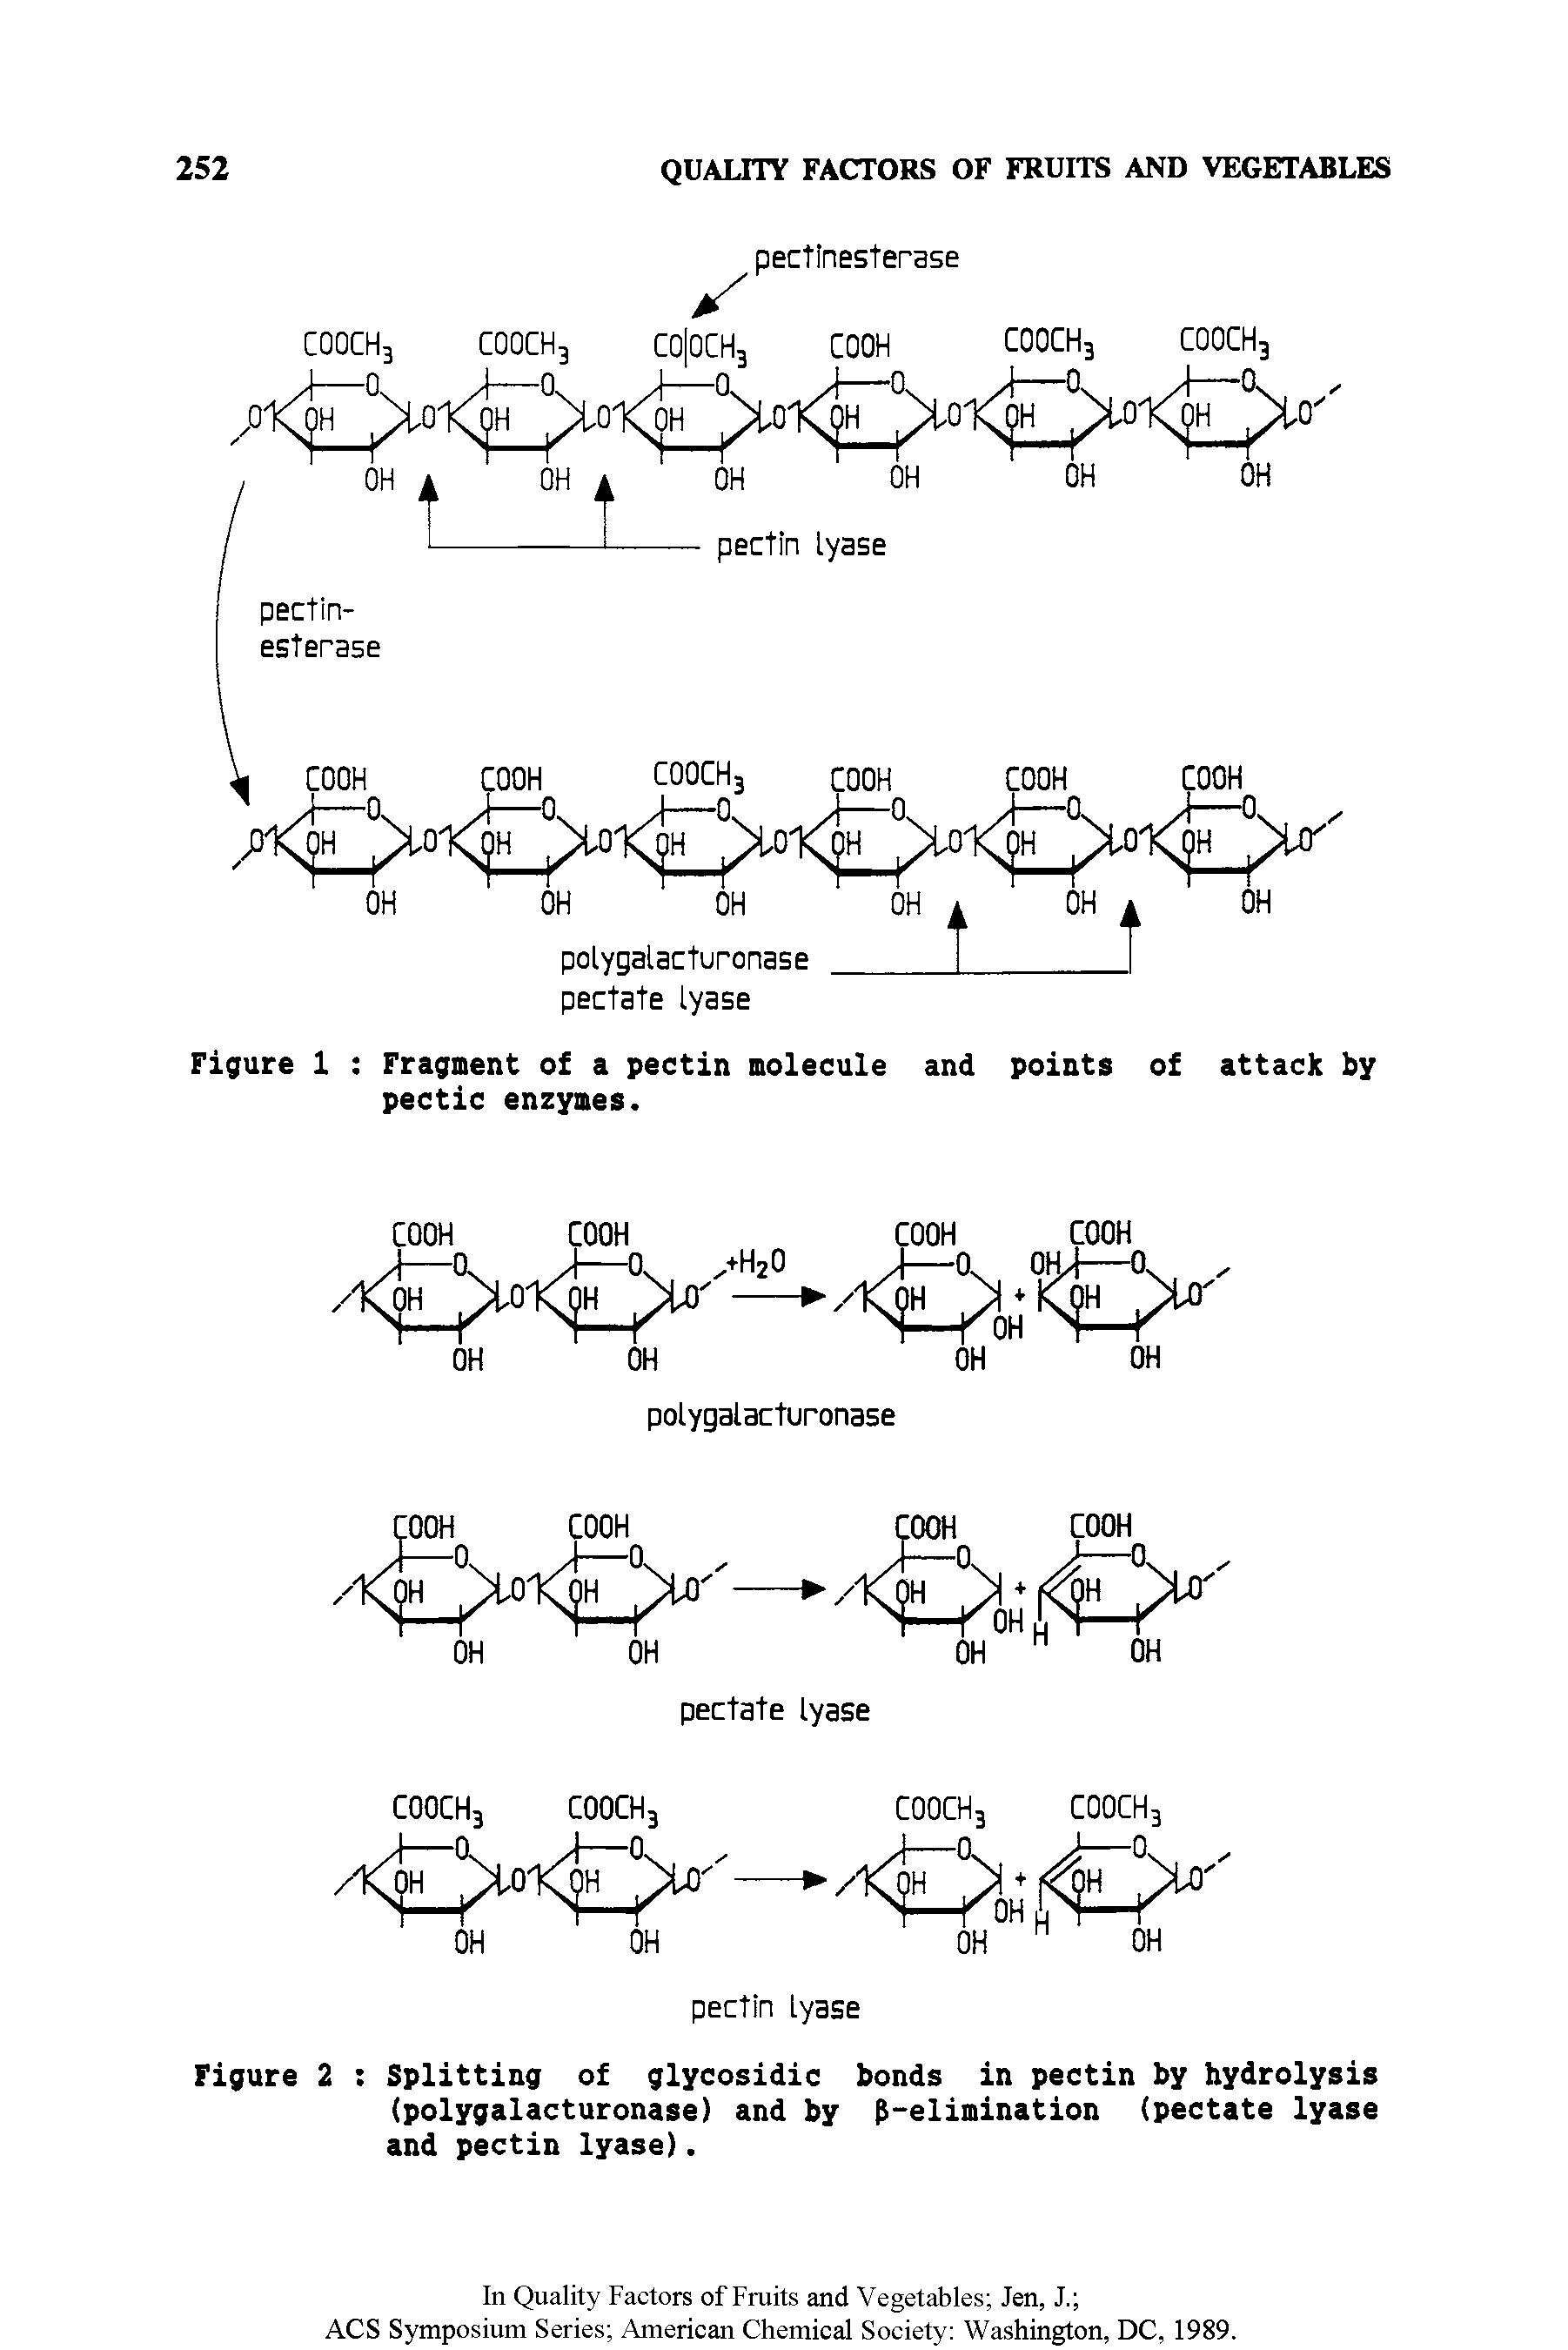 Figure 2 Splitting of glycosidic bonds in pectin by hydrolysis (polygalacturonase) and by -elimination (pectate lyase and pectin lyase).